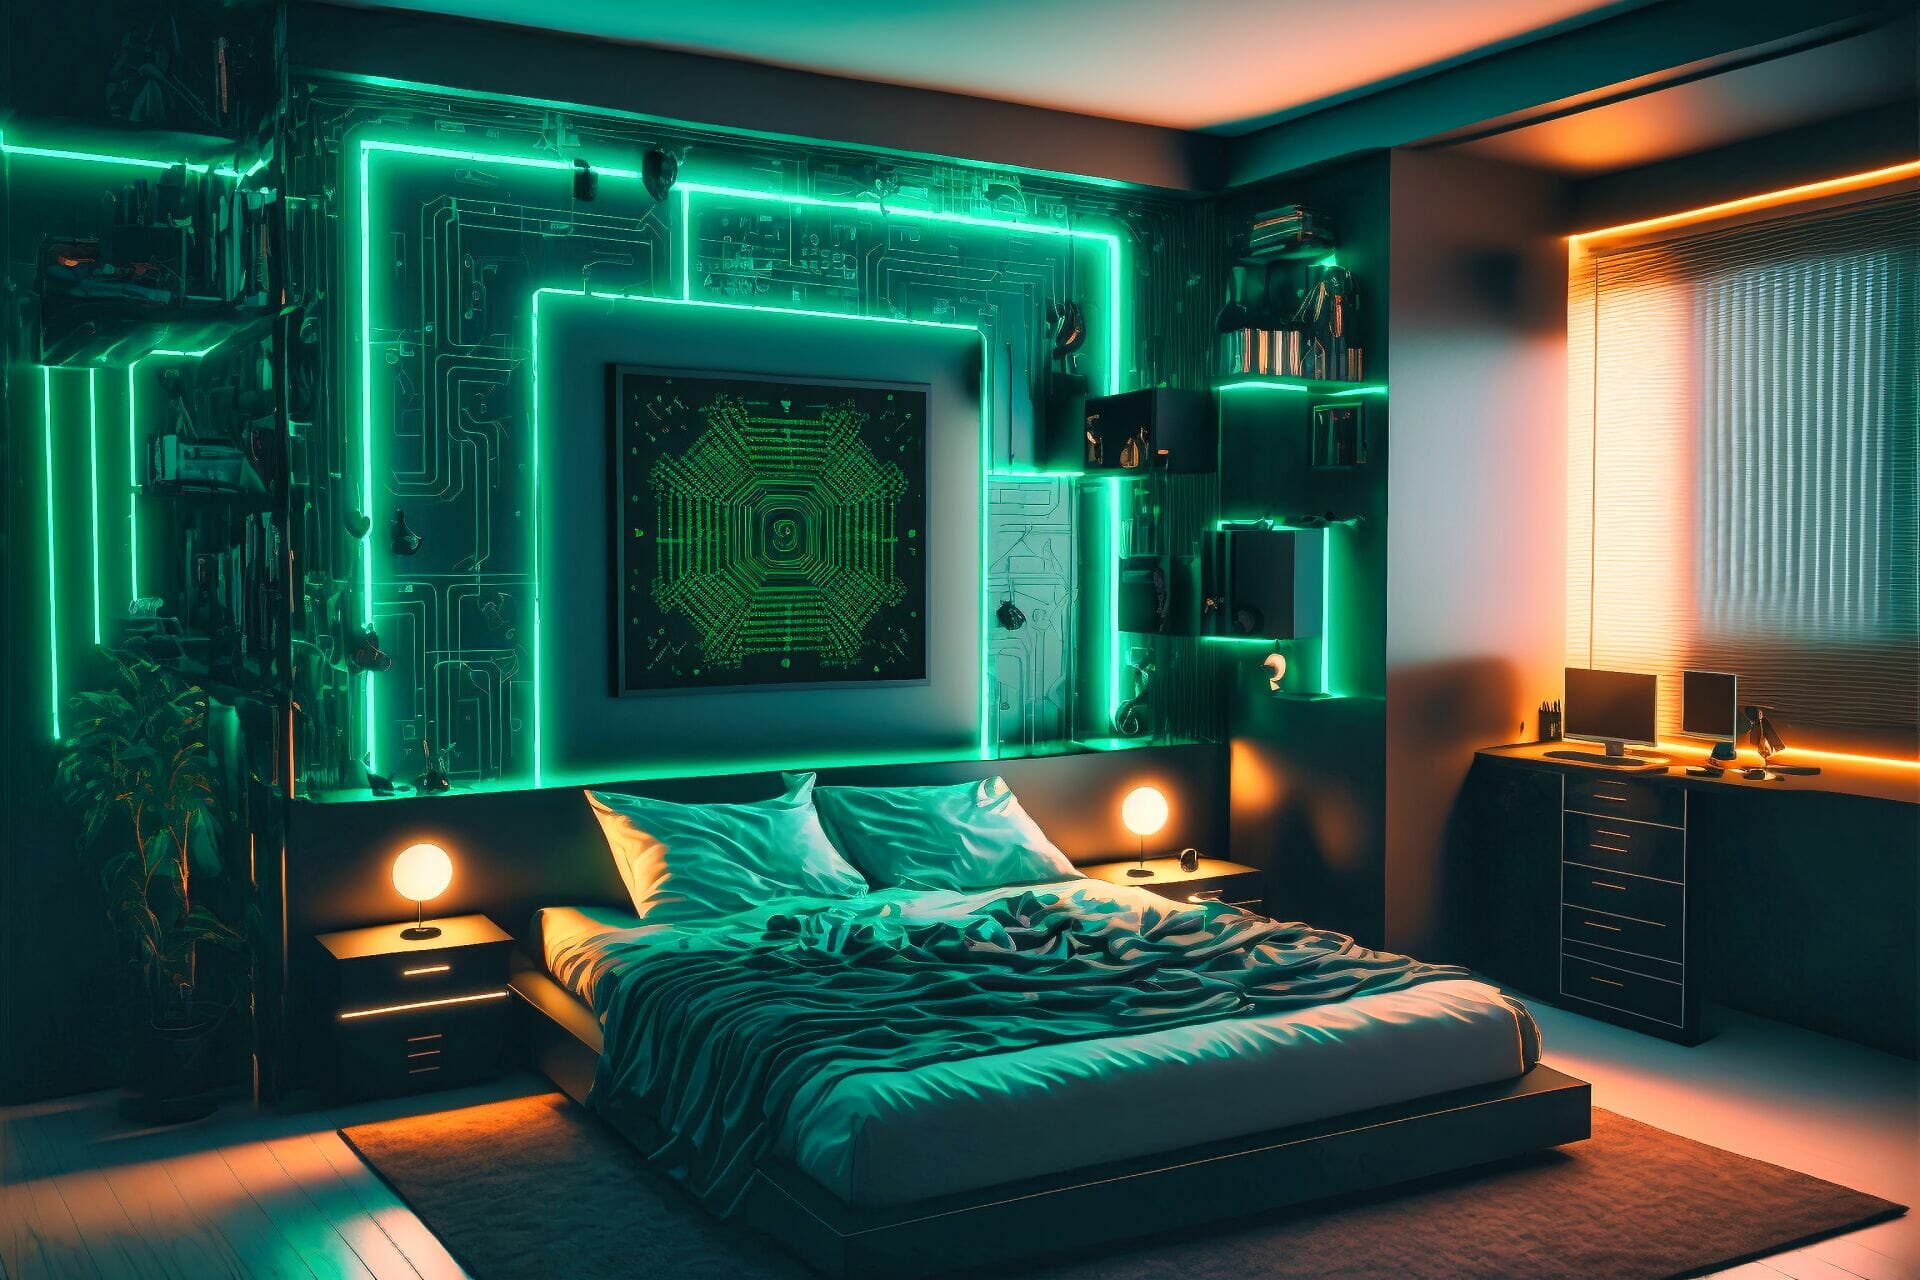 Cyberpunk Styled Bedroom With A High-Tech Matrix Style. The Walls Are Painted A Deep Green, With White Accents And Glowing Neon Lighting. The Center Of The Room Features A Large, Black Bed, With A Matching Bed Frame And Nightstands. The Lighting Is Low And Ambient, With A Light Strip Running Along The Walls, And A Hanging Neon Bulb Providing The Main Lighting Source. The Floor Is An Industrial Tile With A Glossy Finish.